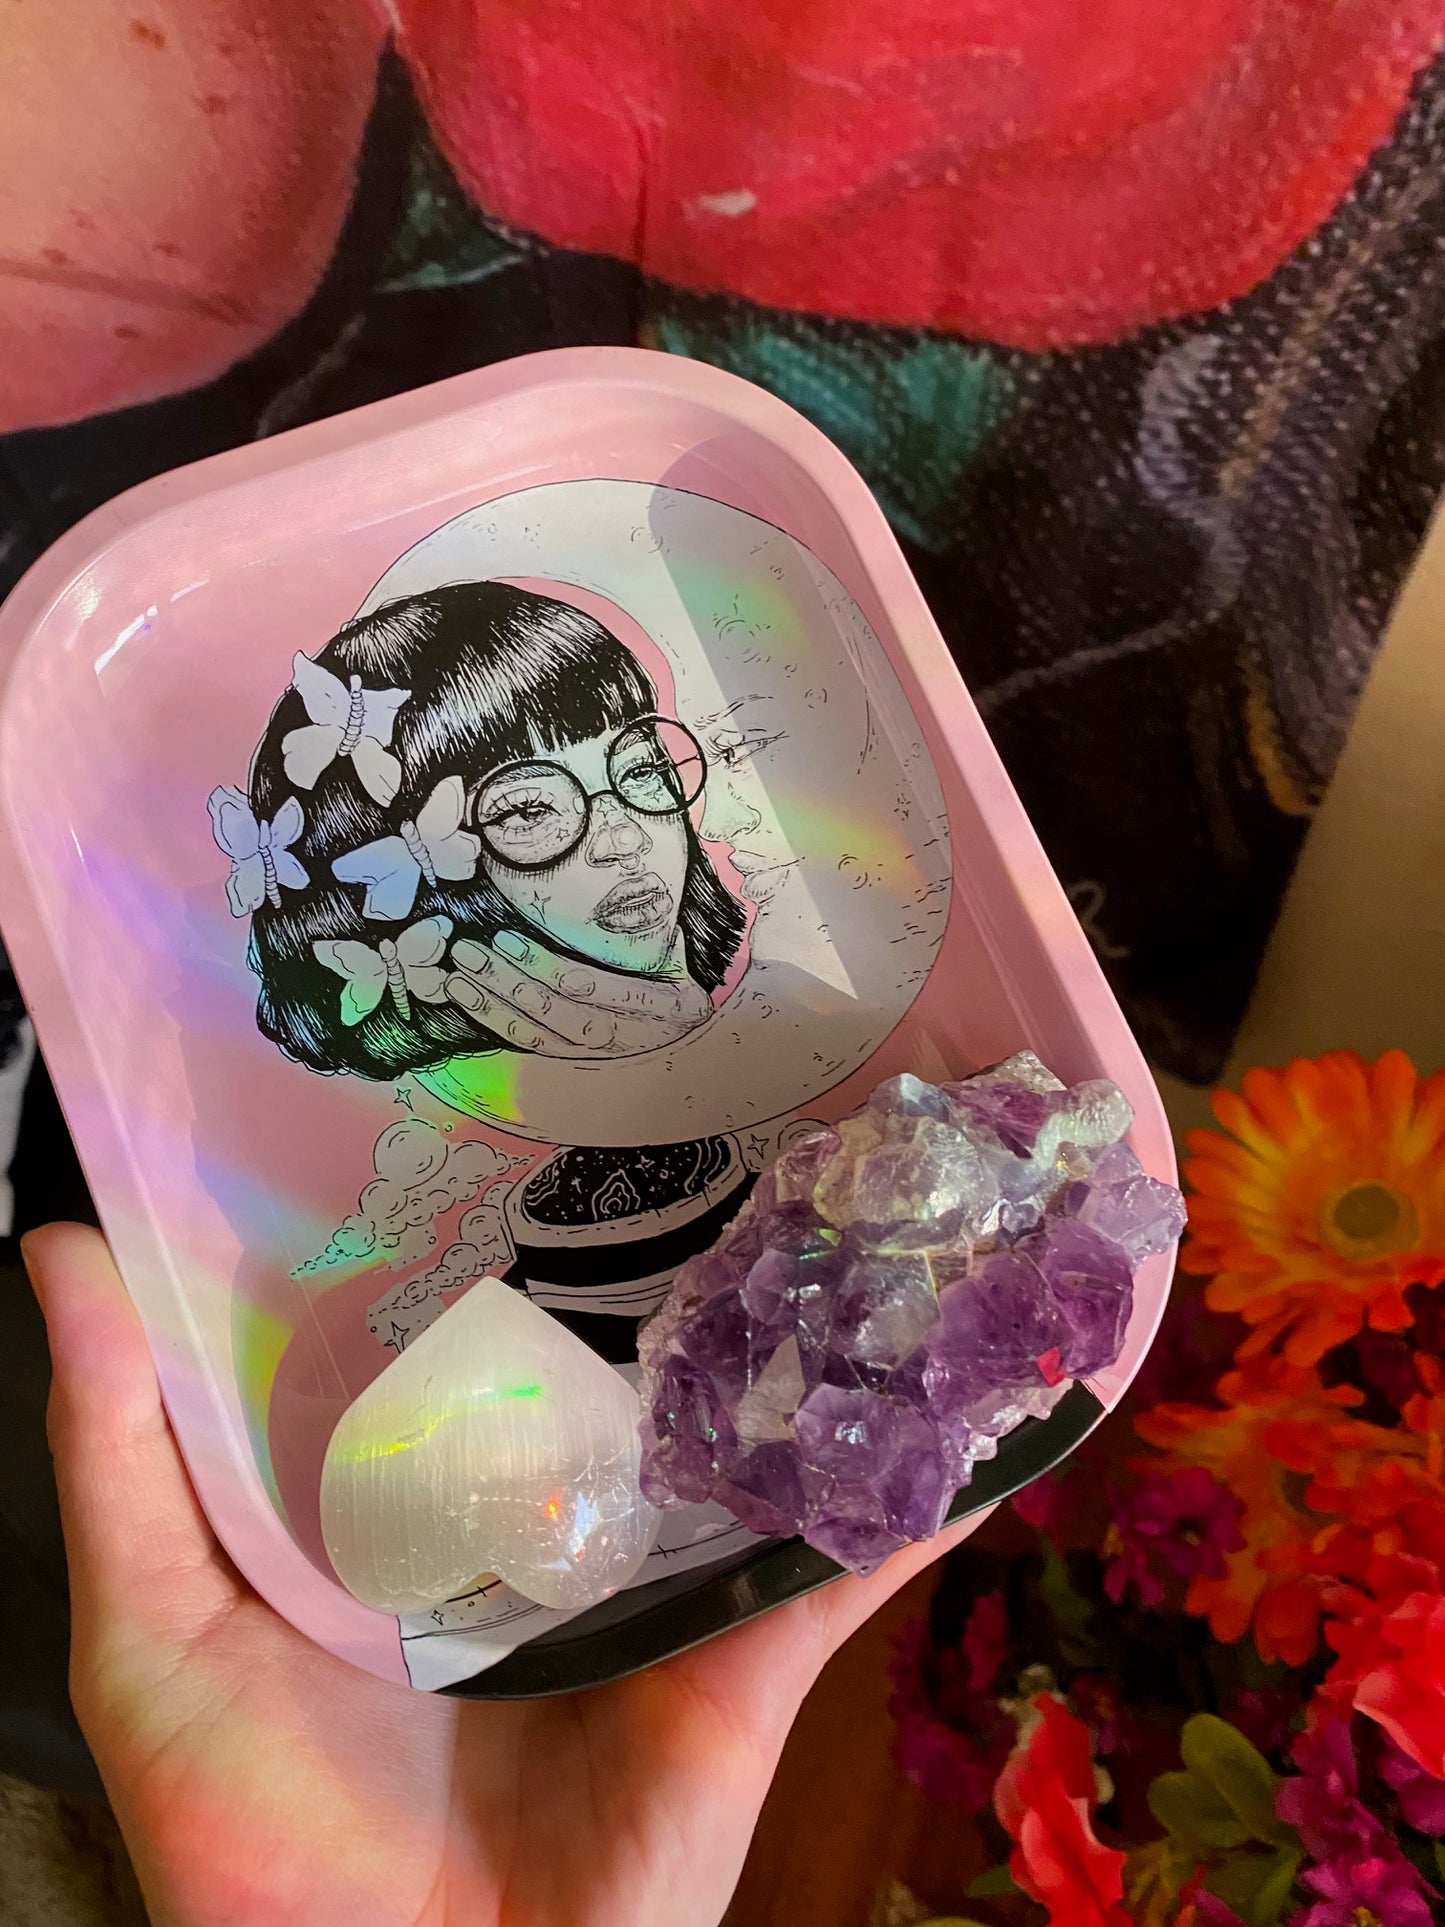 Her Protector rolling tray